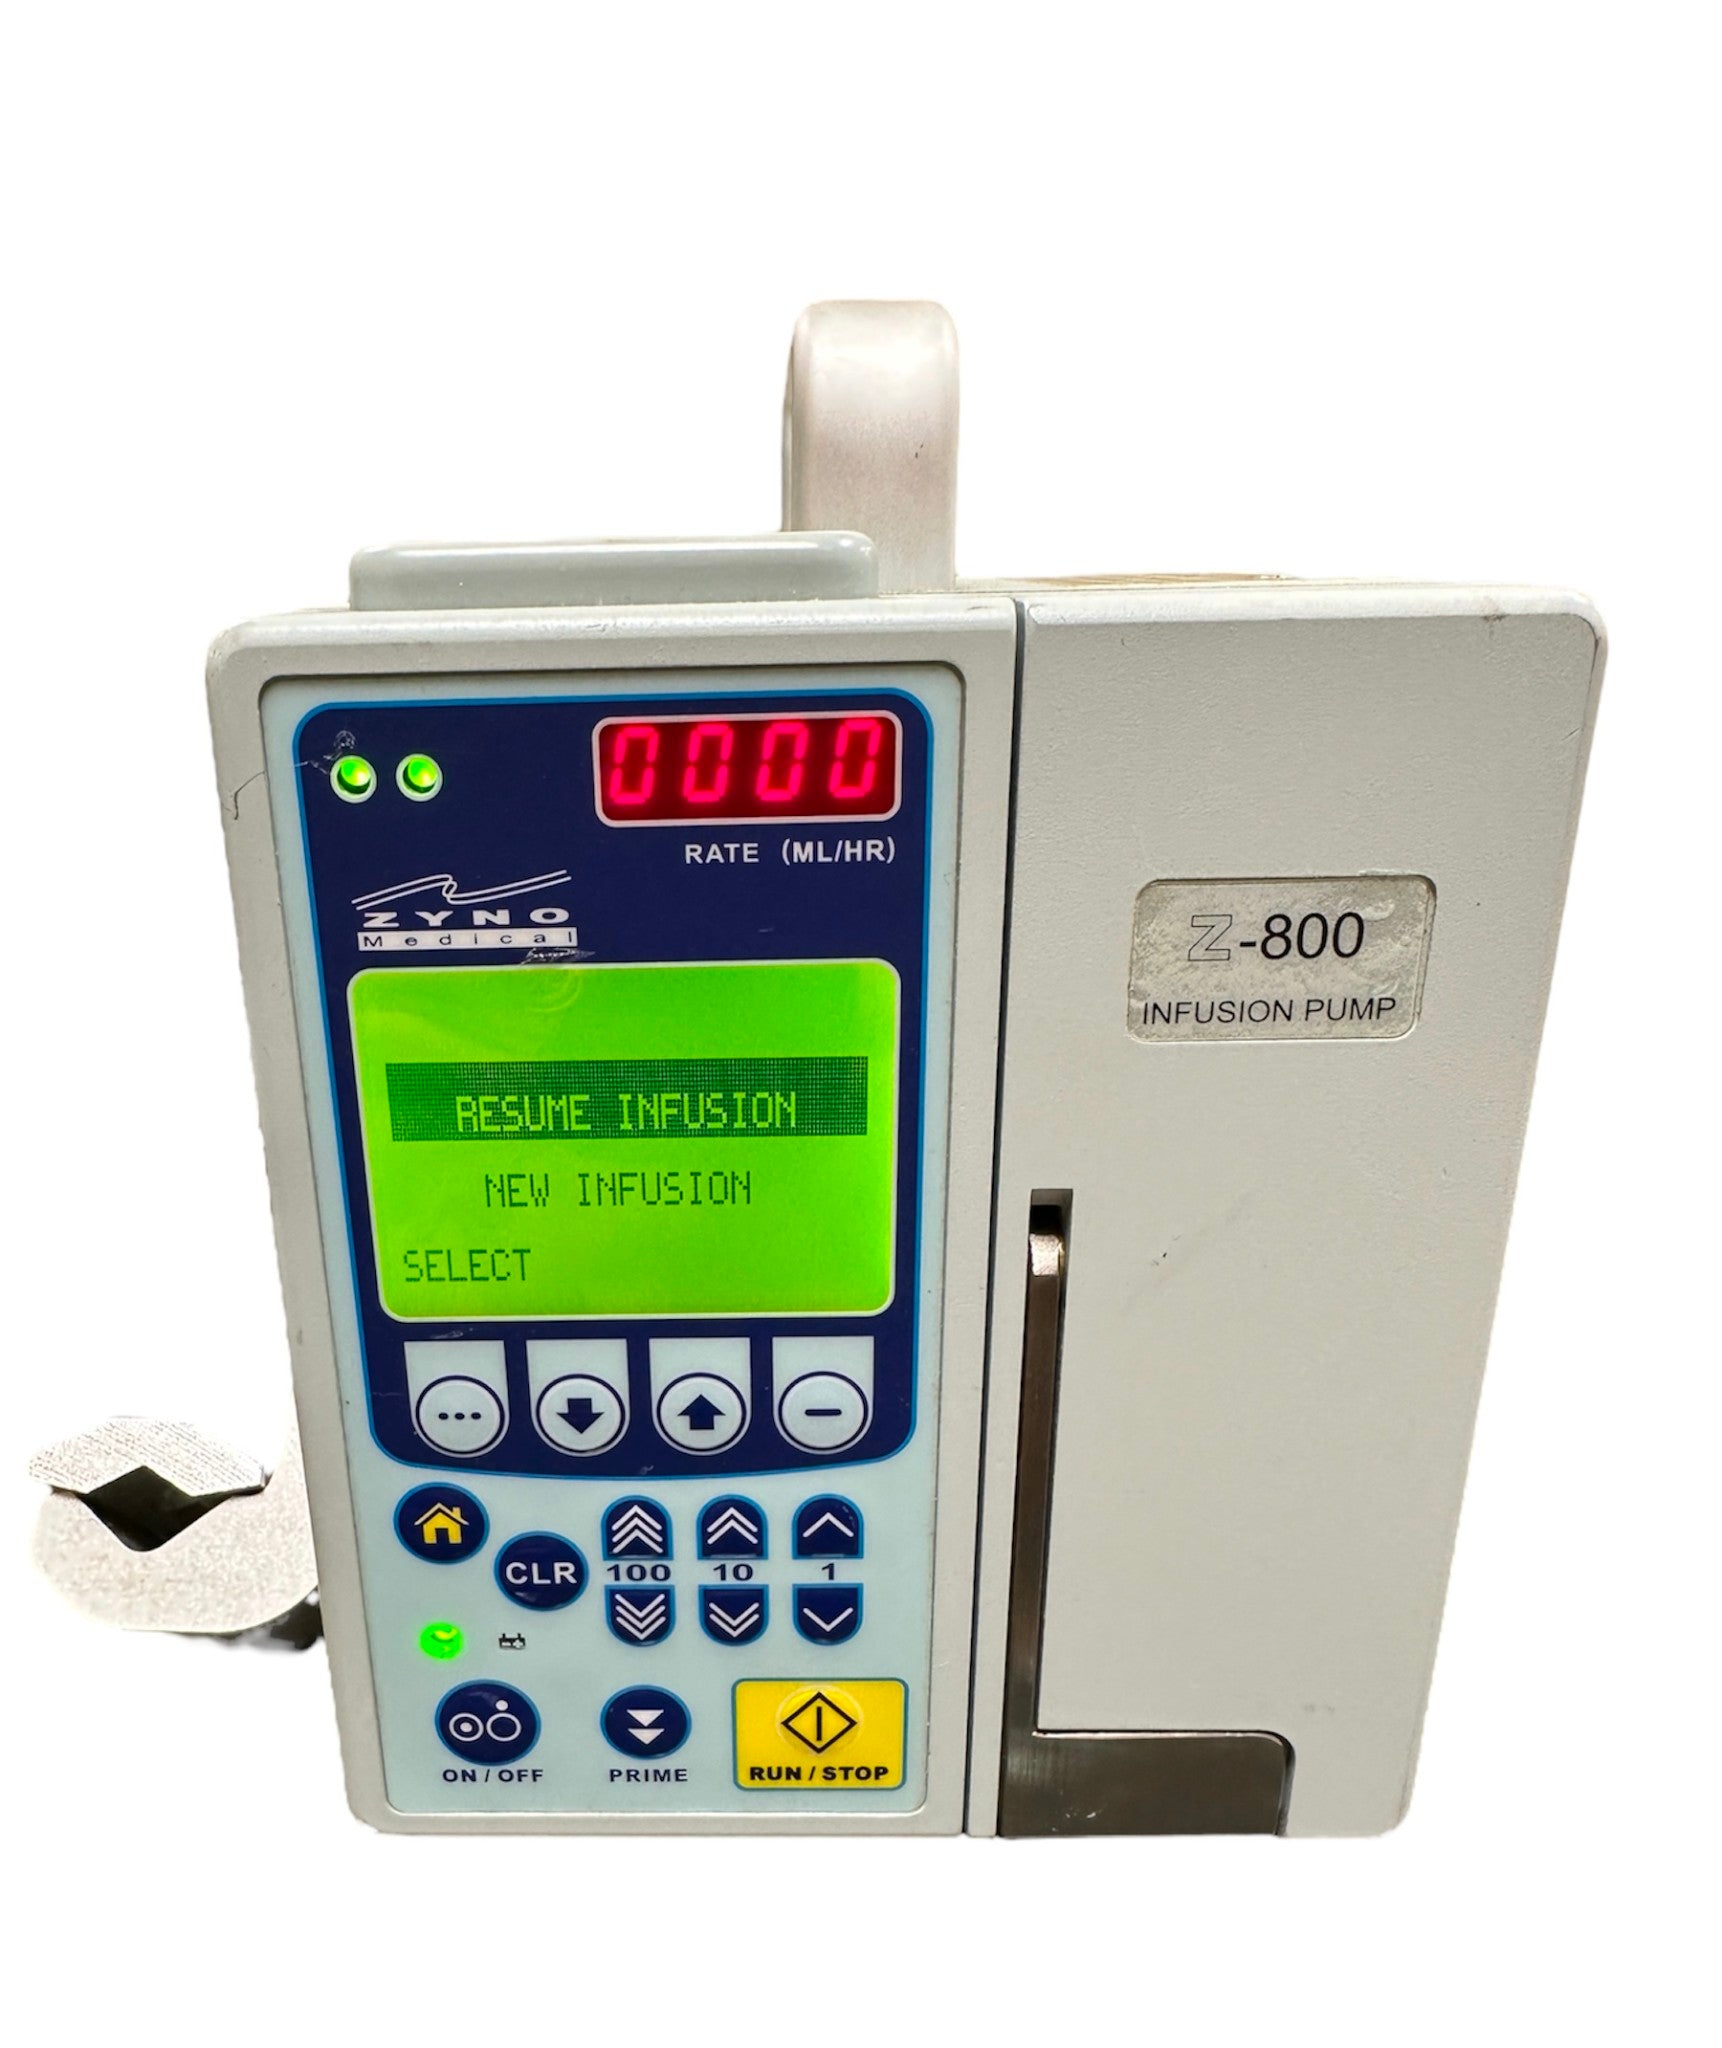 ZYNO MEDICAL Z-800 INFUSION PUMP DIAGNOSTIC ULTRASOUND MACHINES FOR SALE